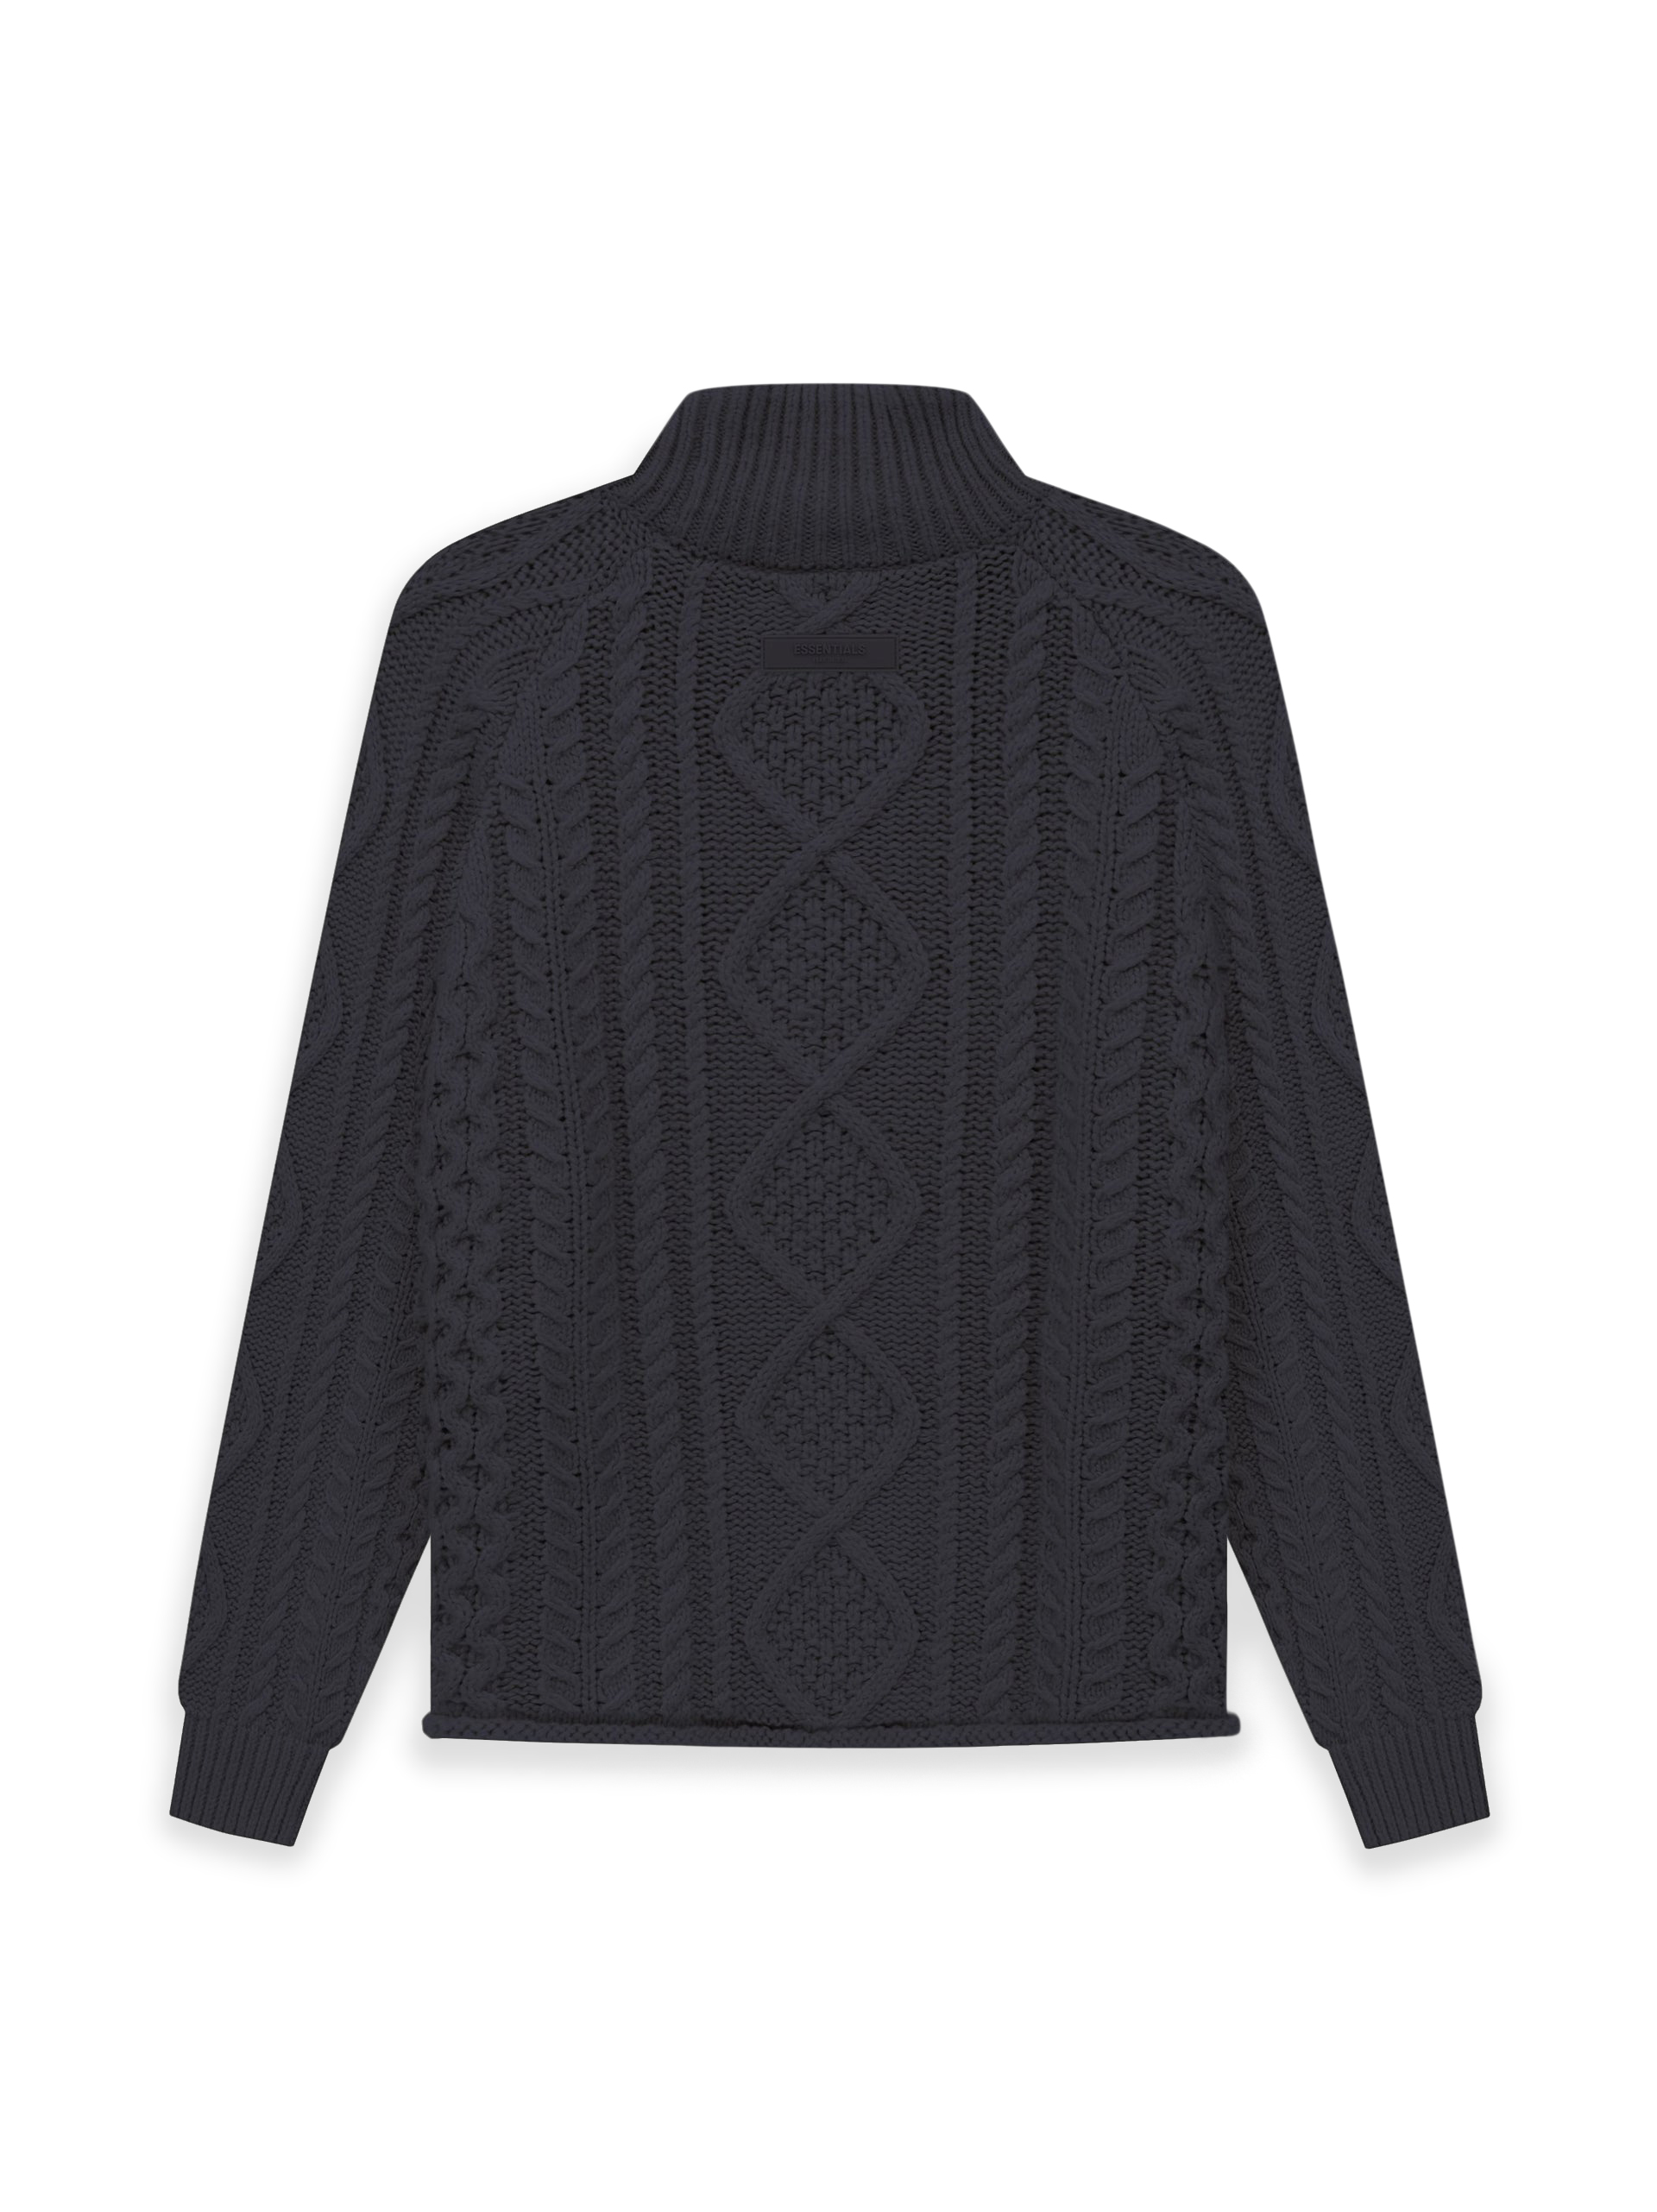 Gucci Off-White Cable Knit Turtleneck